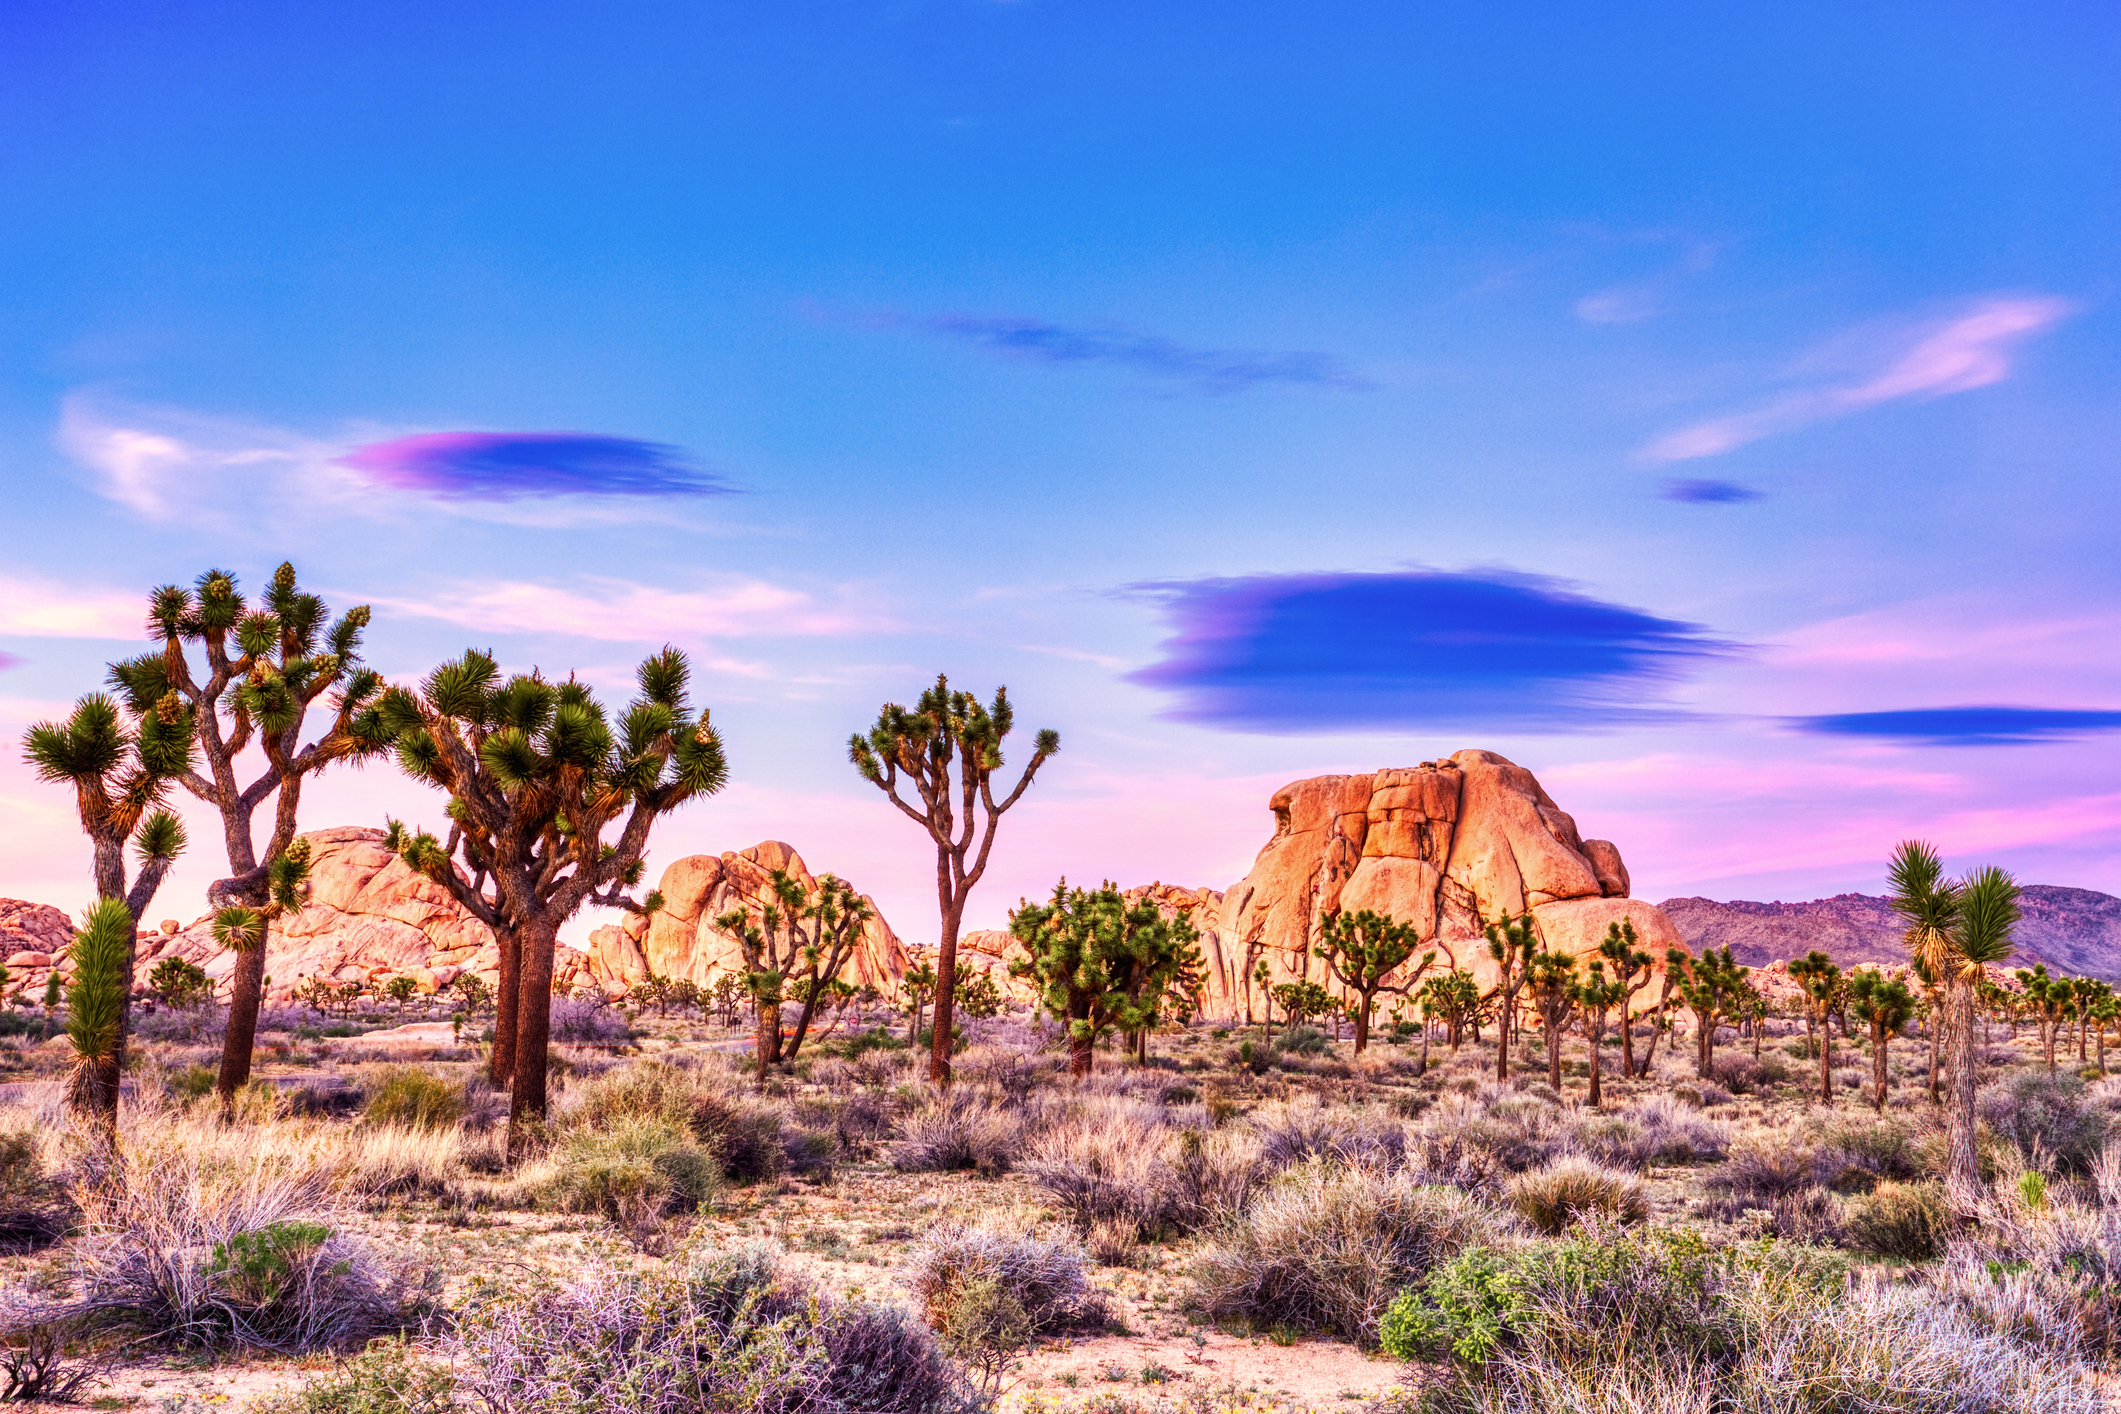 Joshua Tree National Park is one of the top 10 most popular national parks in the U.S.